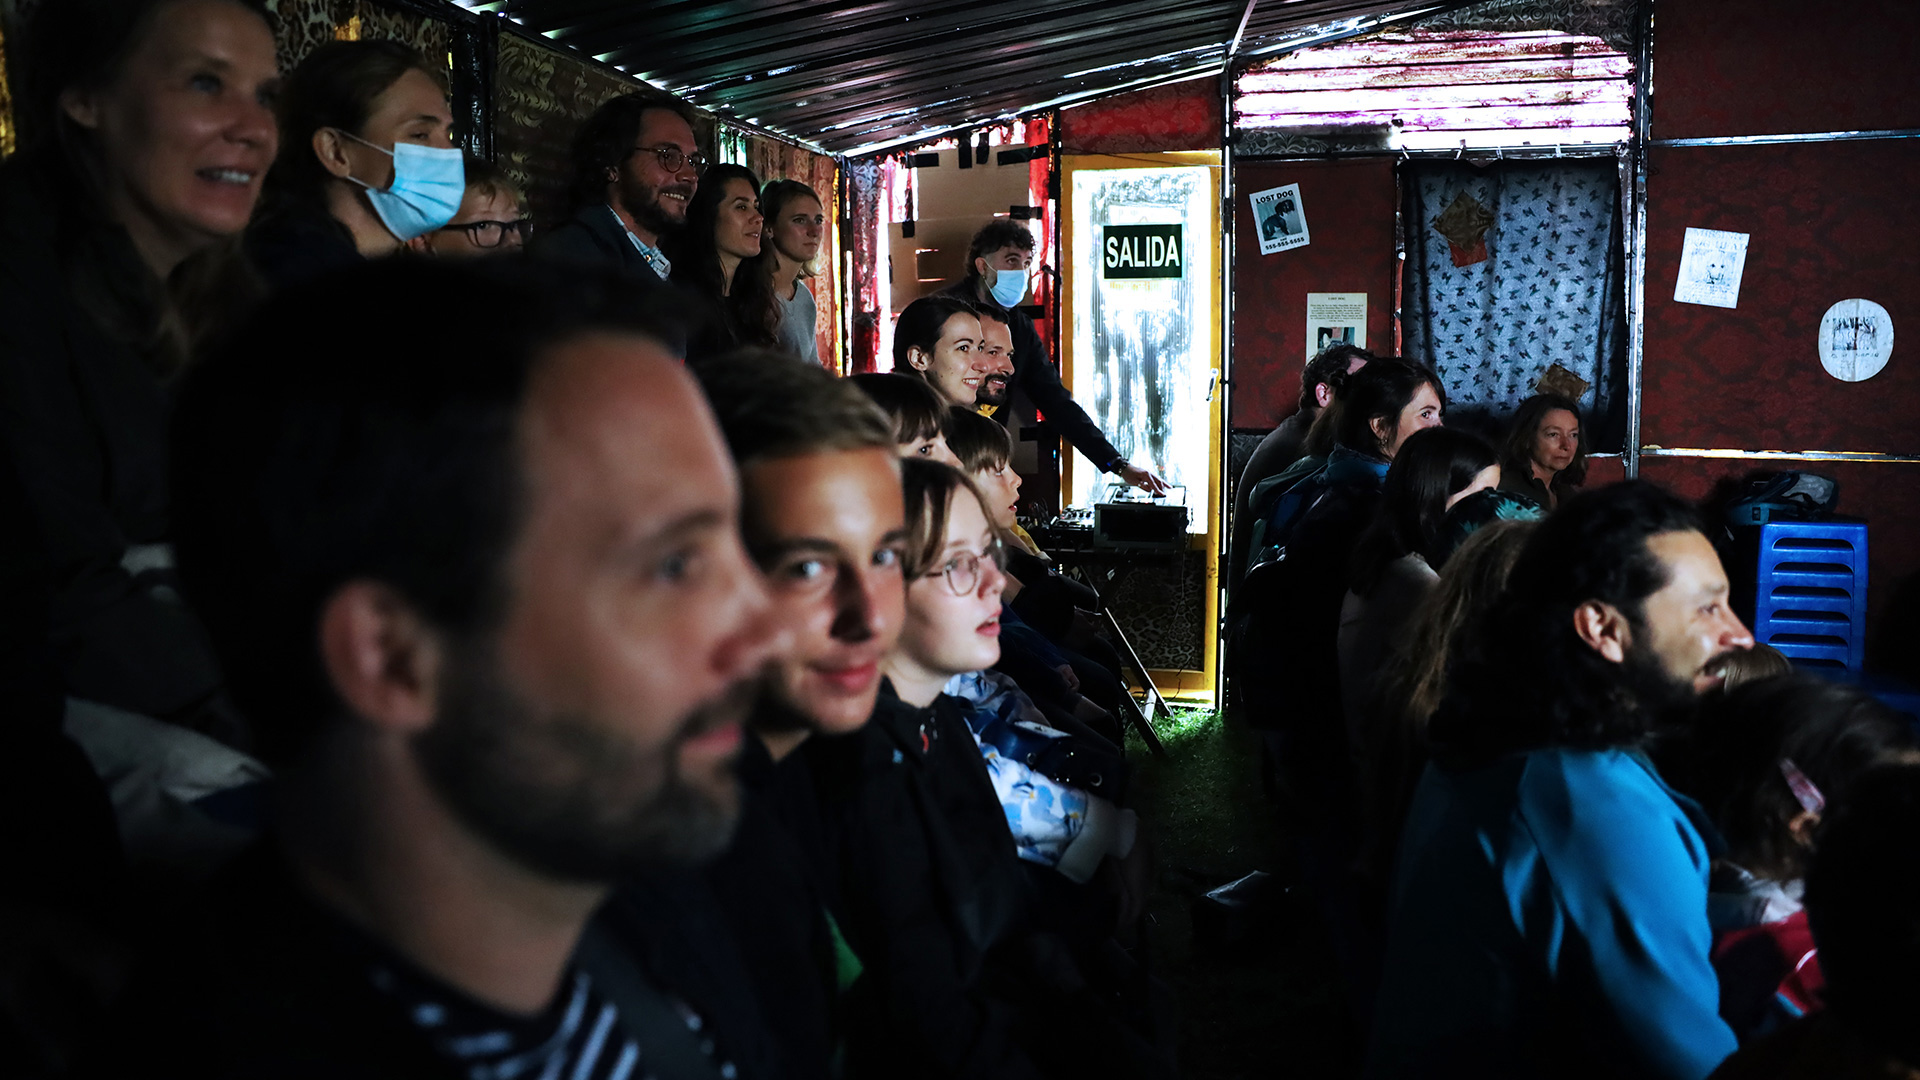 The Lausanne audience inside the "Lost Dog" shanty-house Photo: Noemi Cinelli